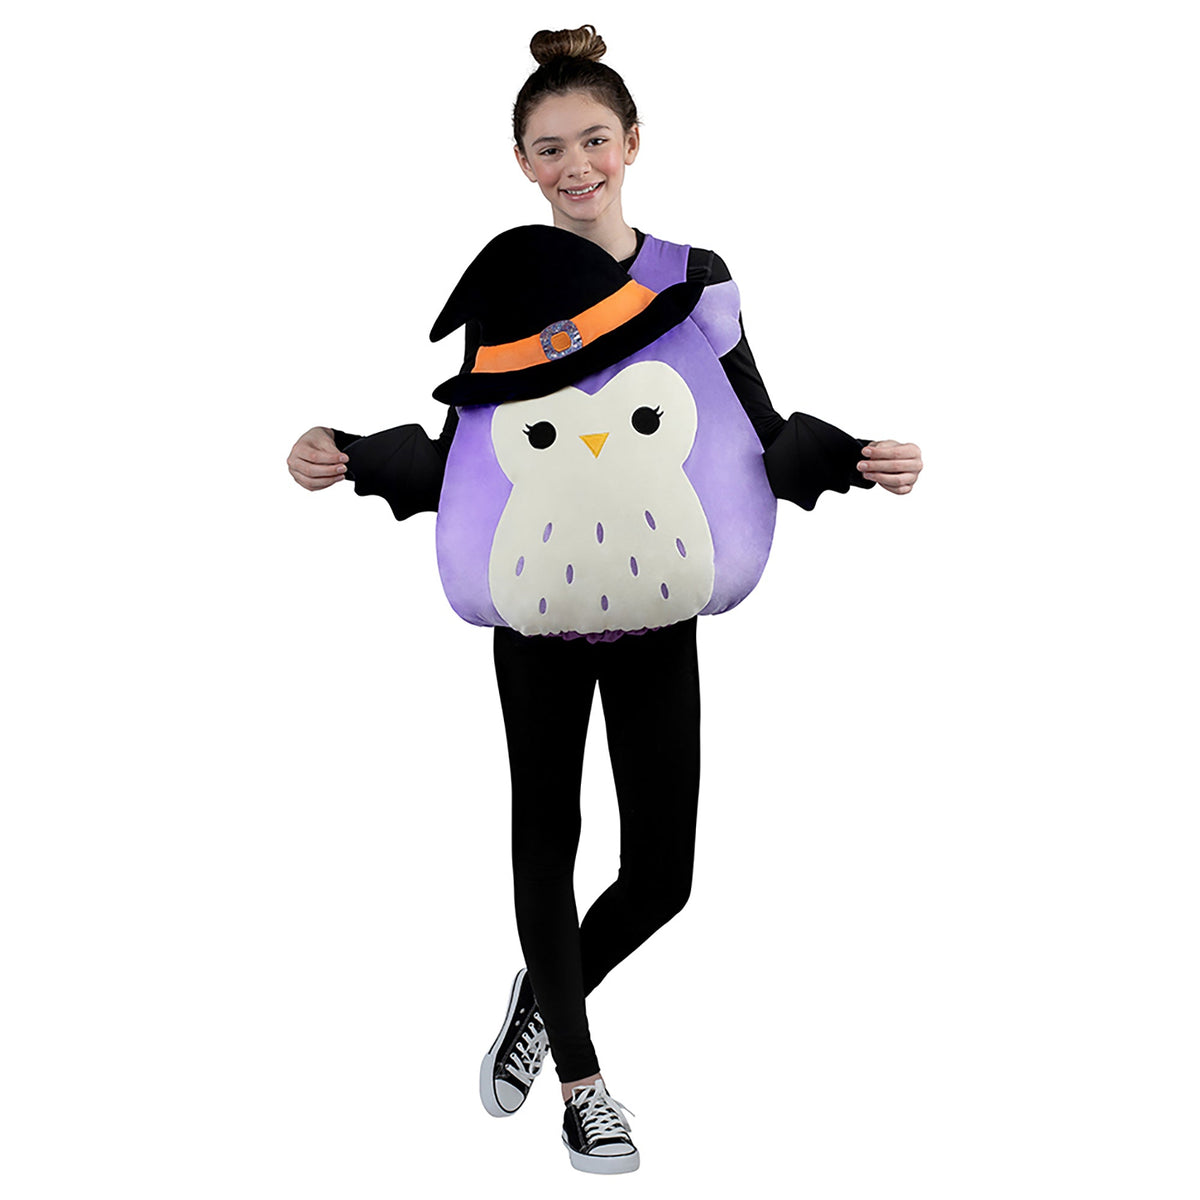 KROEGER Costumes Squishmallows Holly the Owl Vest Costume for Kids 191726466956